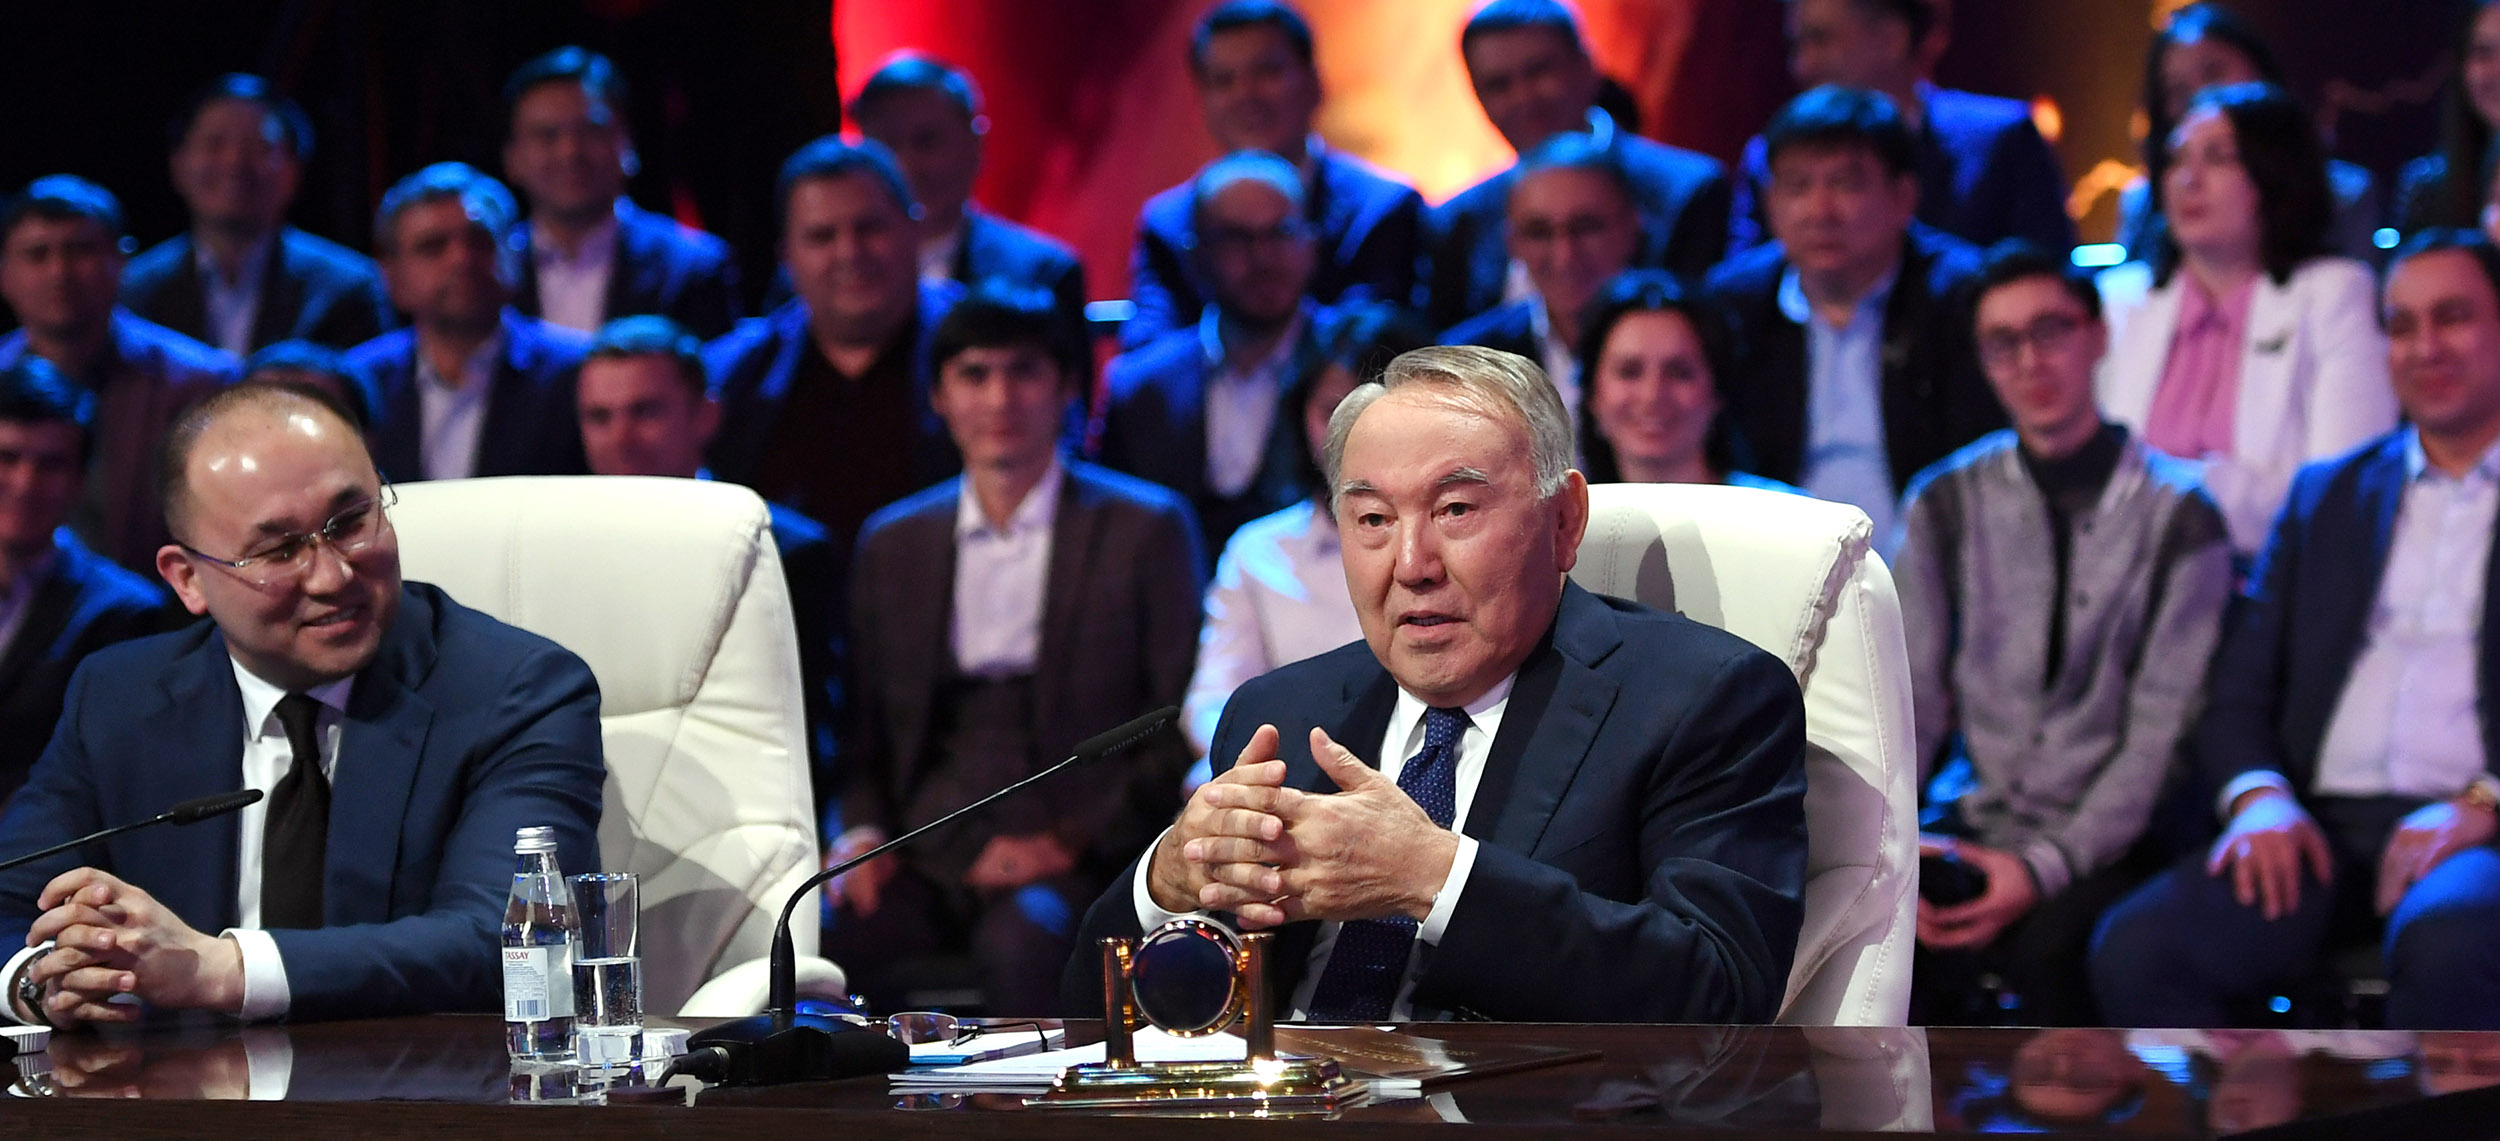 Kazakh President meets with the participants of the project "100 new faces of Kazakhstan"